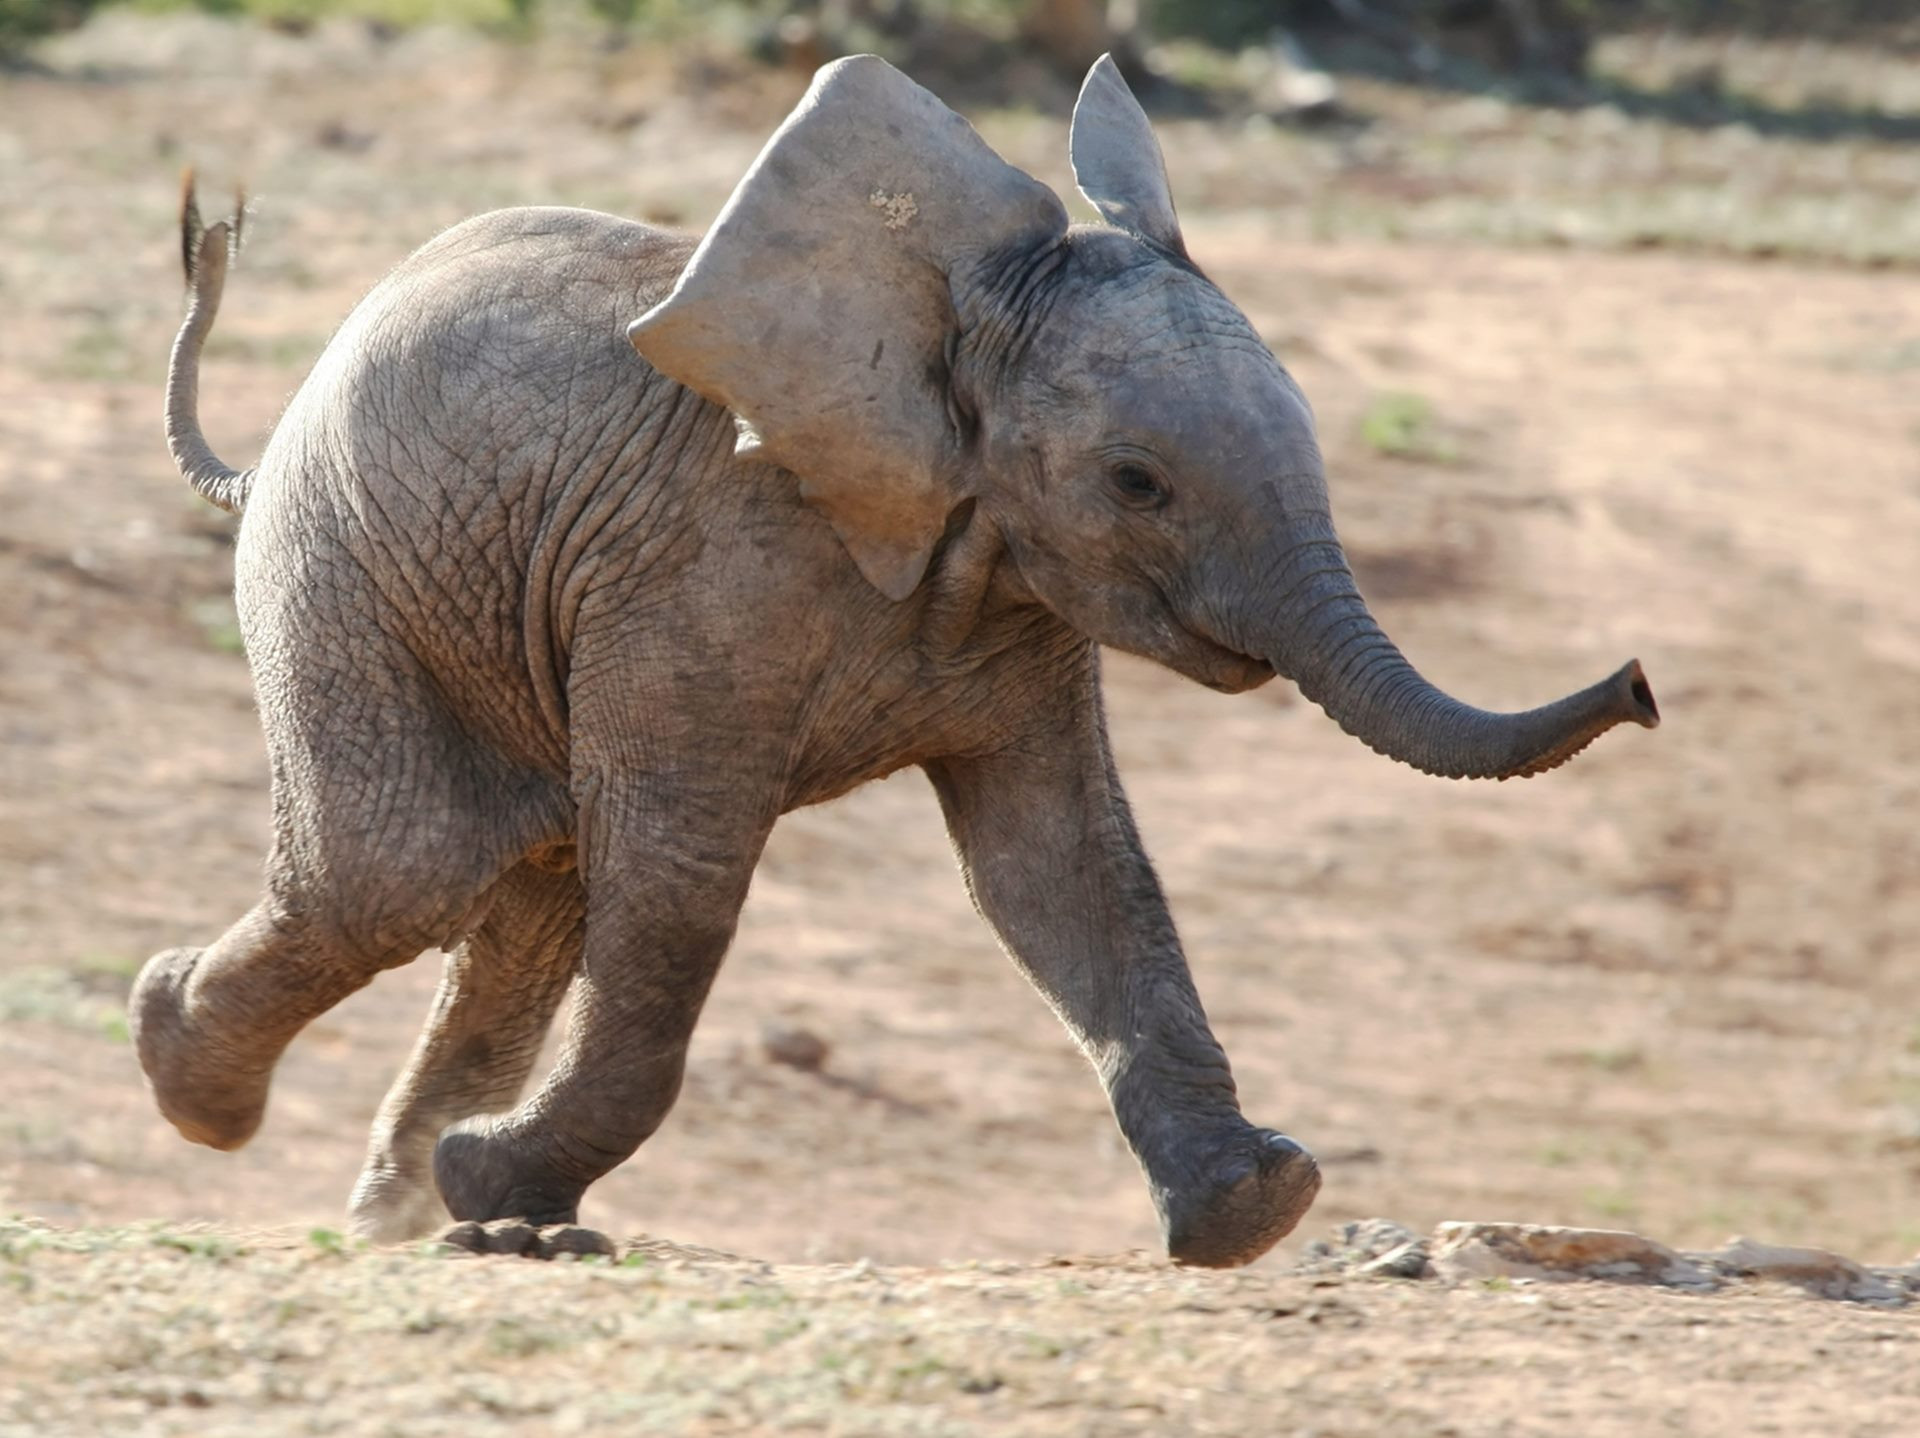 Baby Elephant Running Wallpaper Daily Fintech Stuning Images | ohidul.me